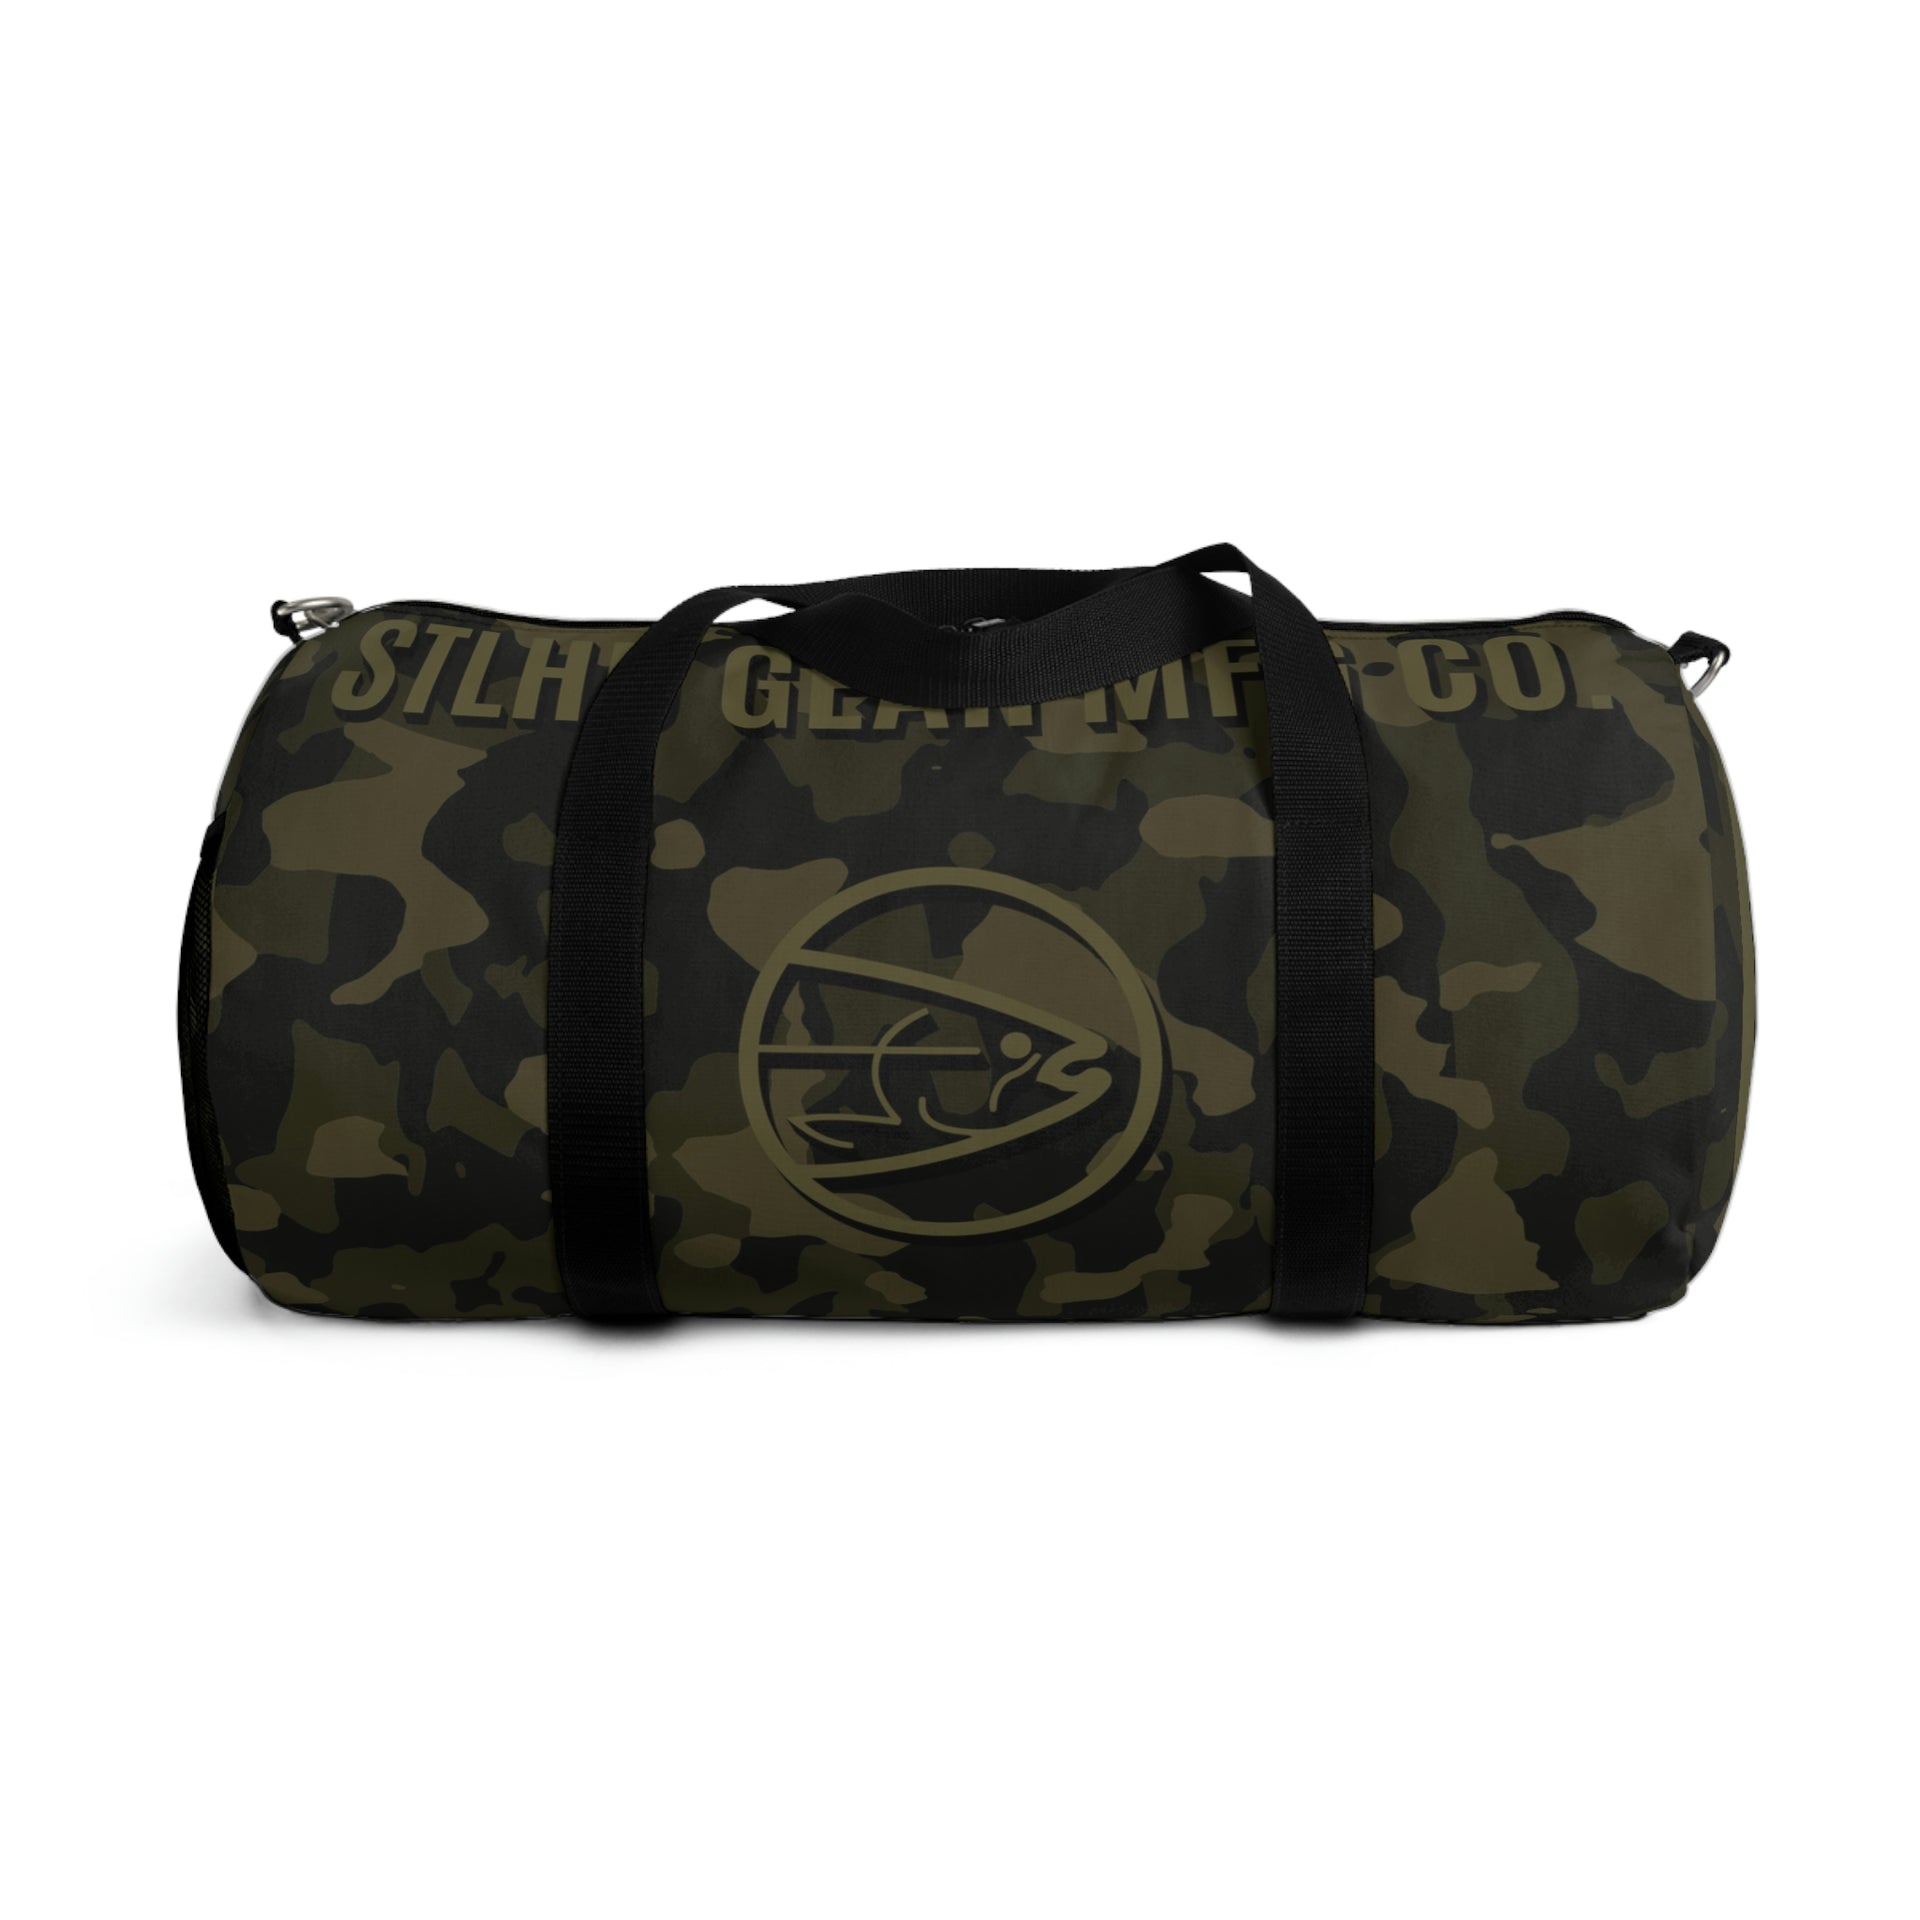 STLHD Eclipse Army Camo Gear Bag - H&H Outfitters